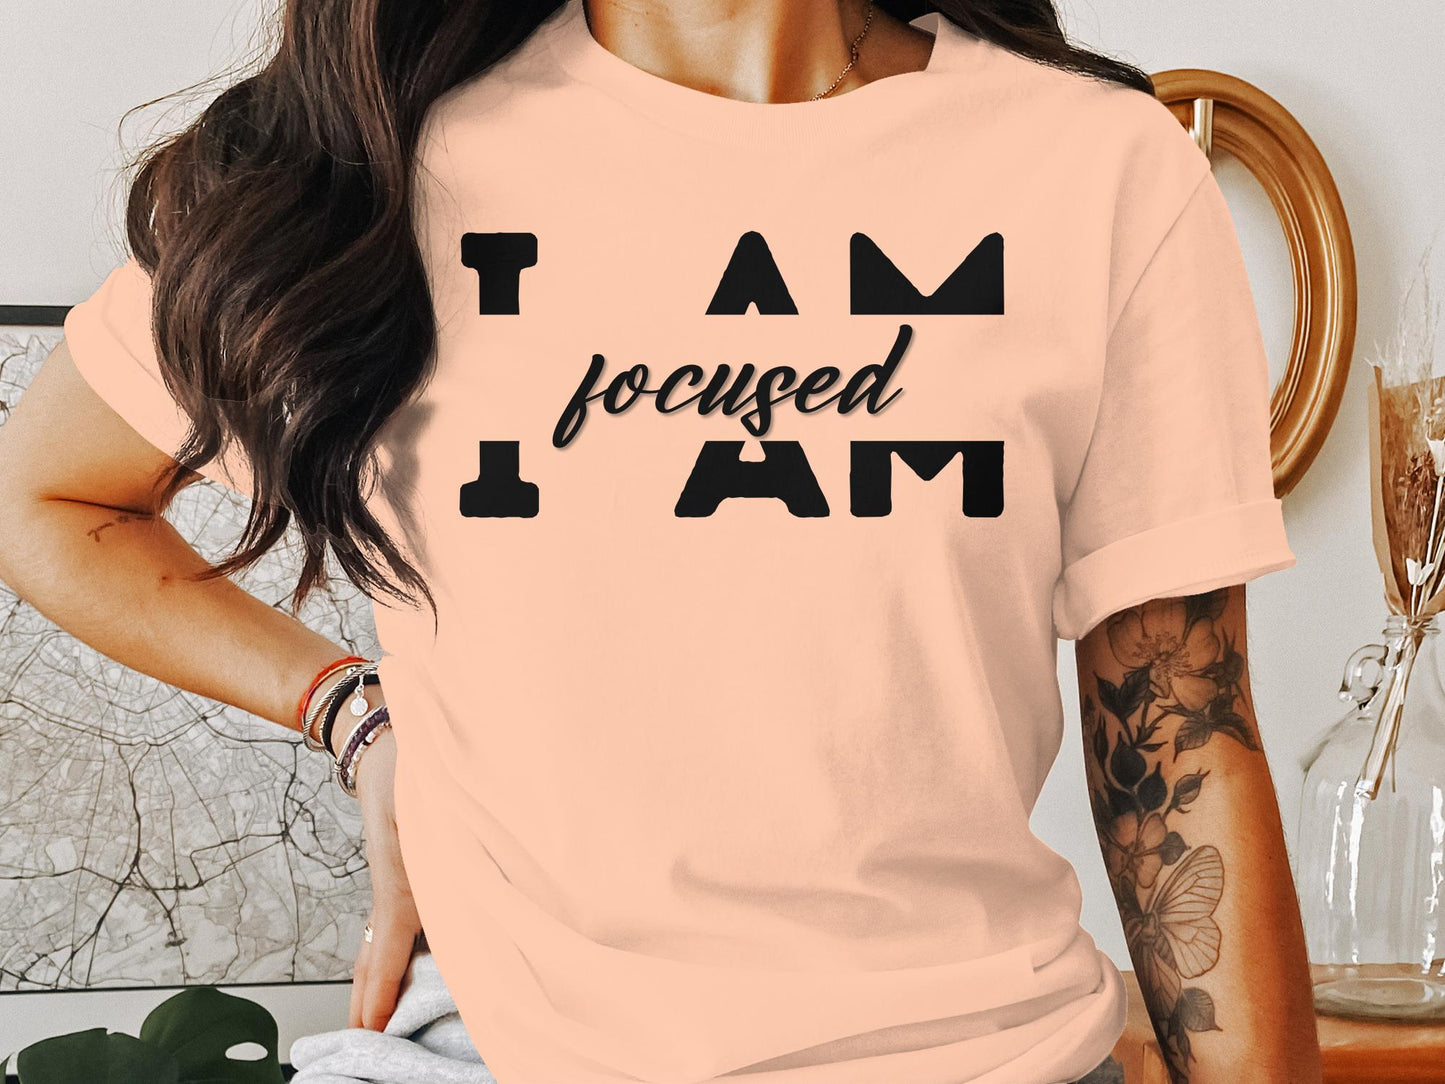 I Am Focused - Affirmation Quote Shirt - Encouraging and Motivating